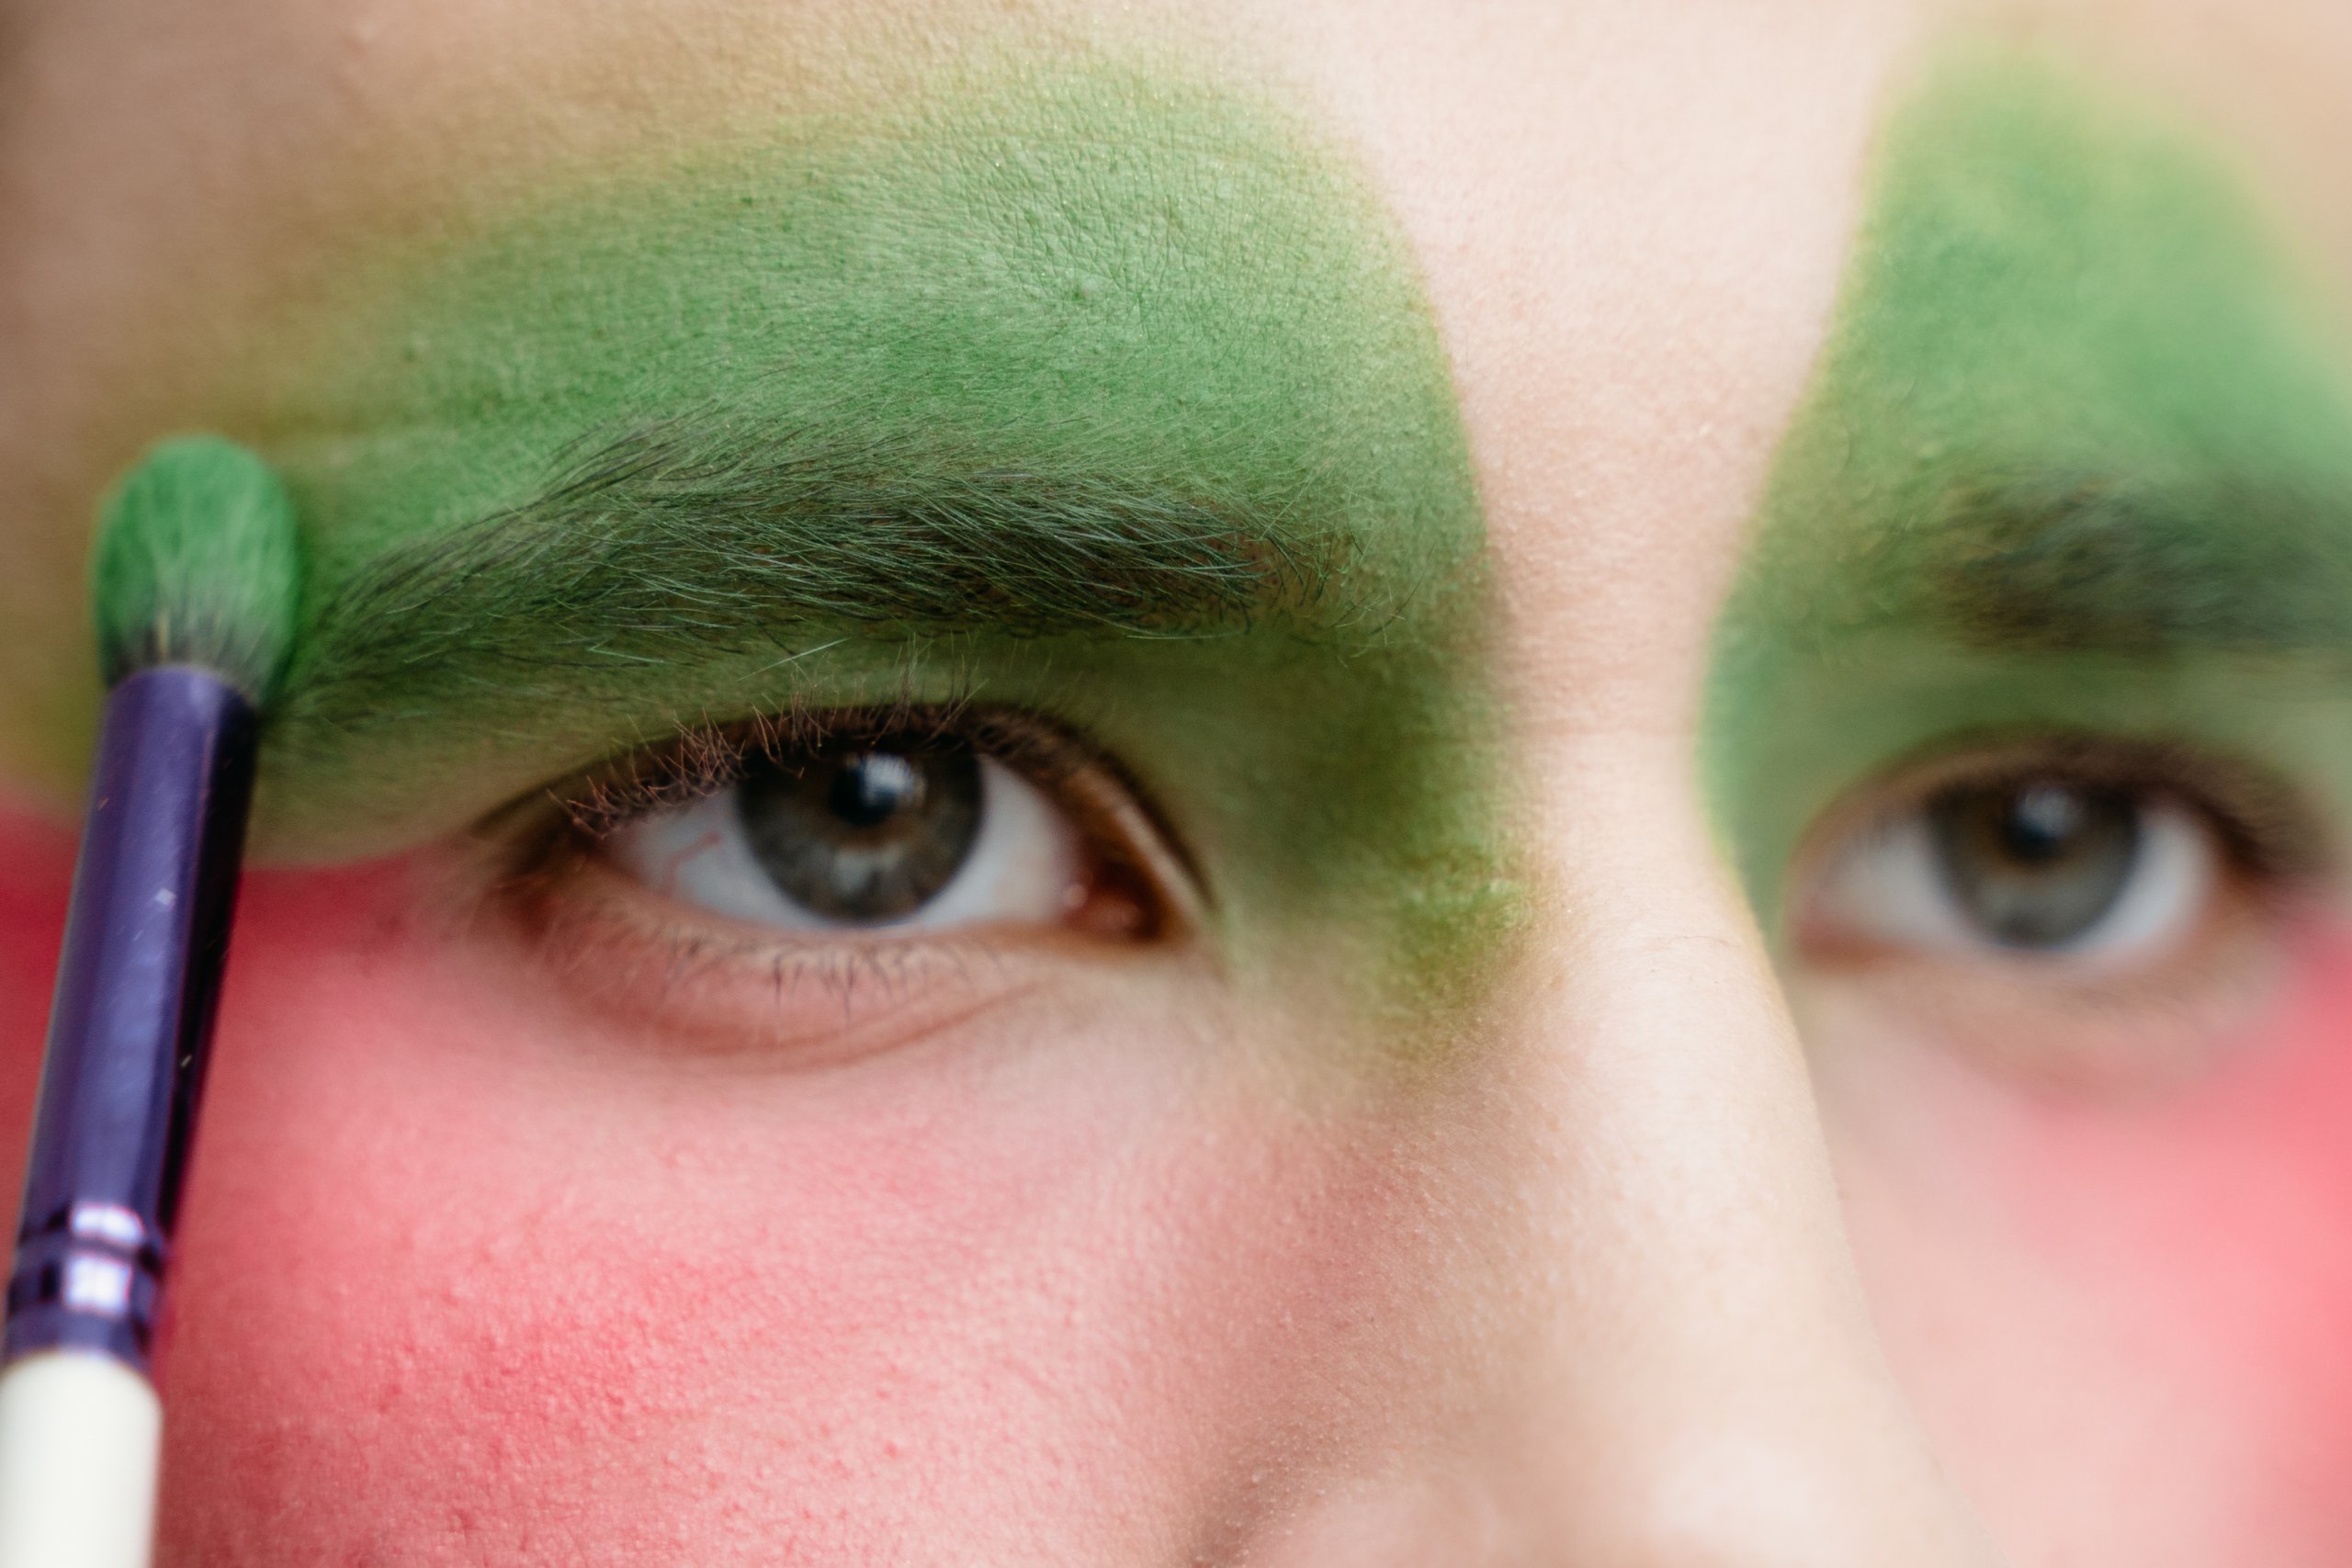 A close up shot of a person with green eyeshadow